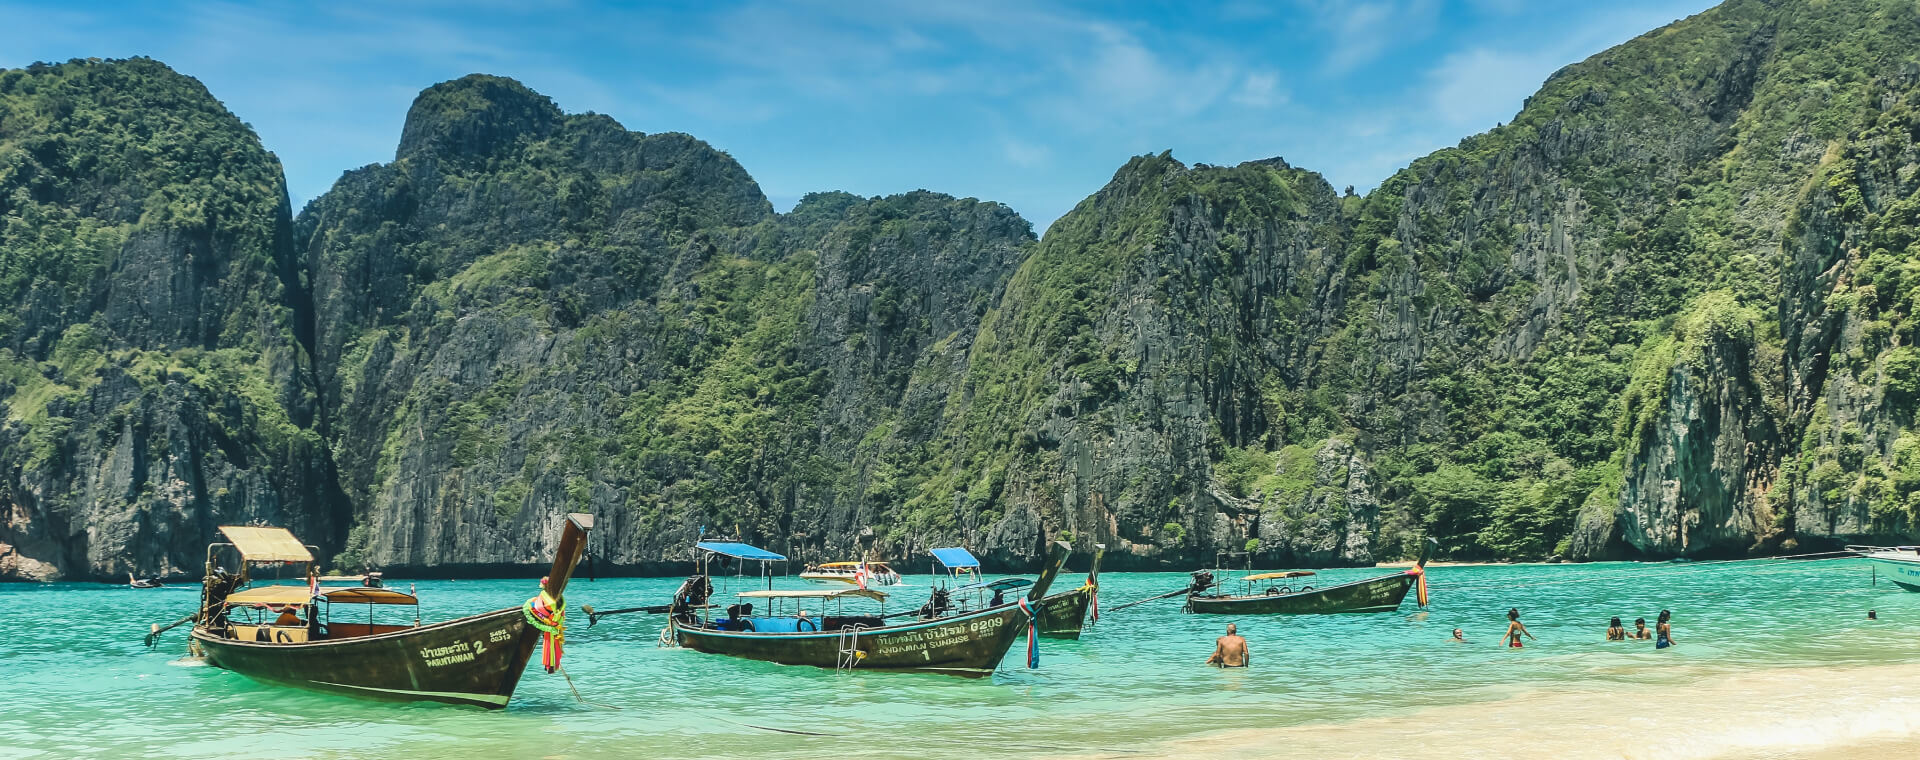 Boats docked on a beach in thailand.